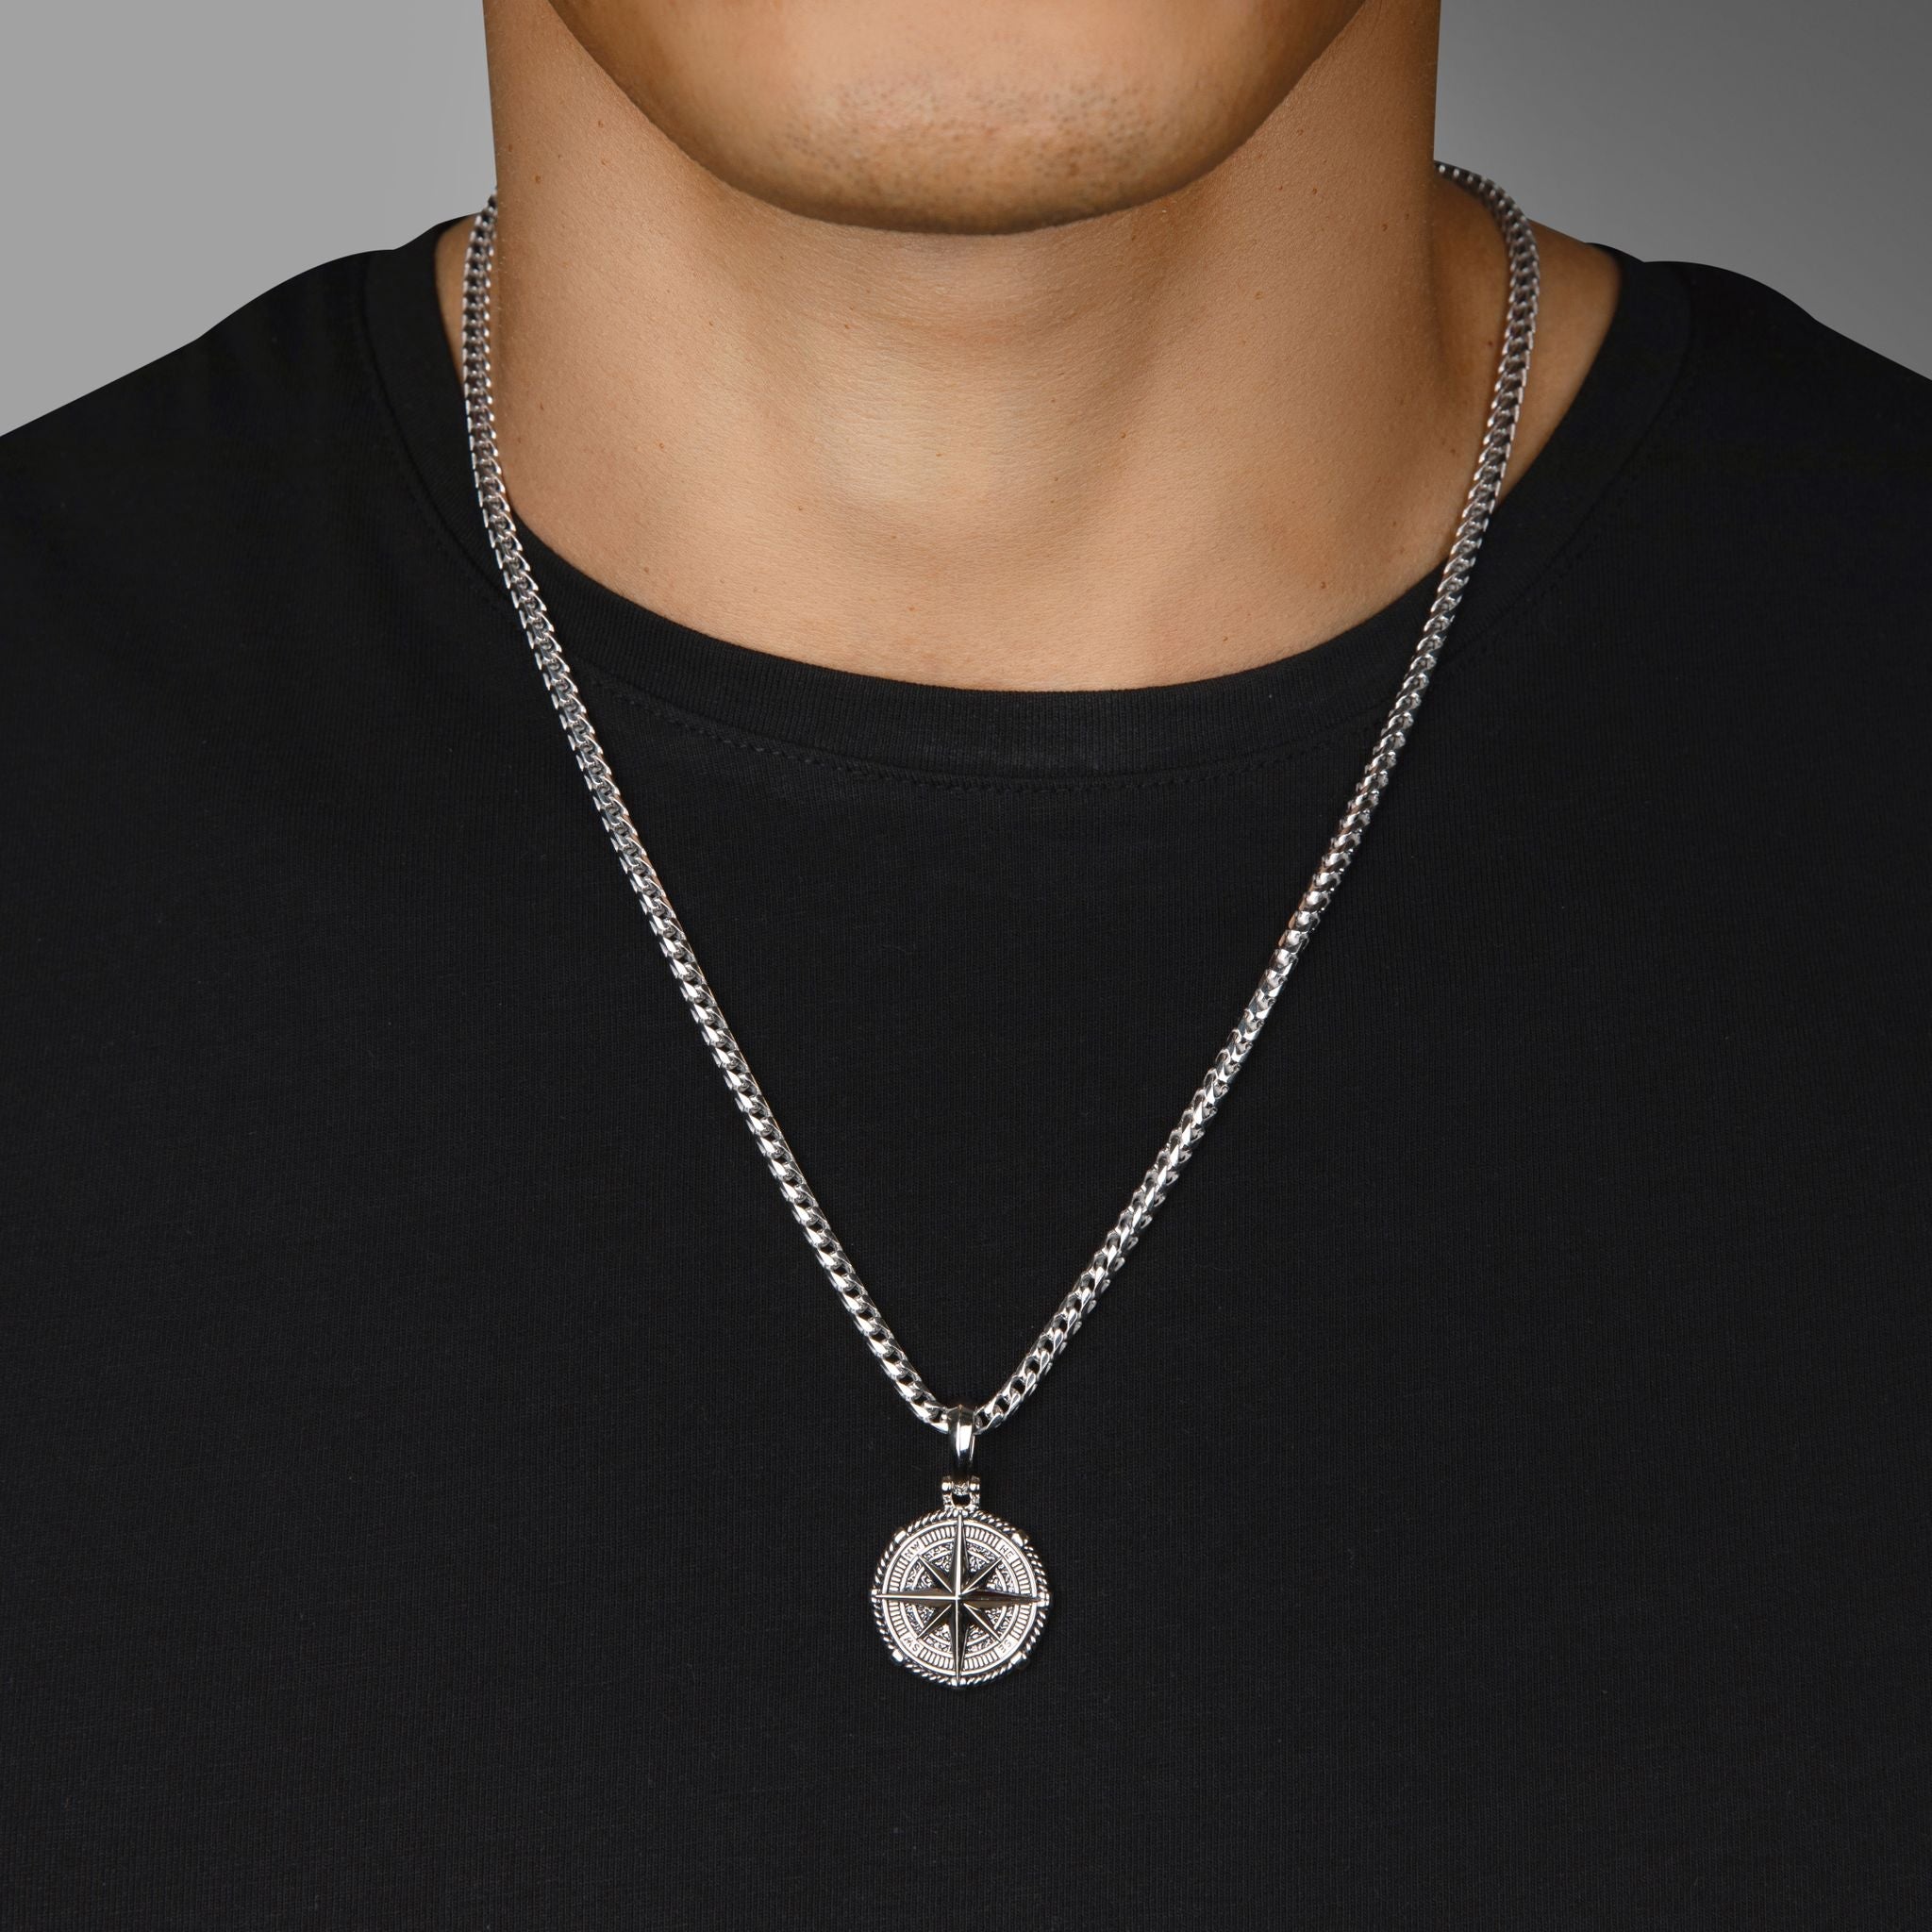 Compass Pendant by Proclamation Jewelry, Silver Mens Compass Necklace